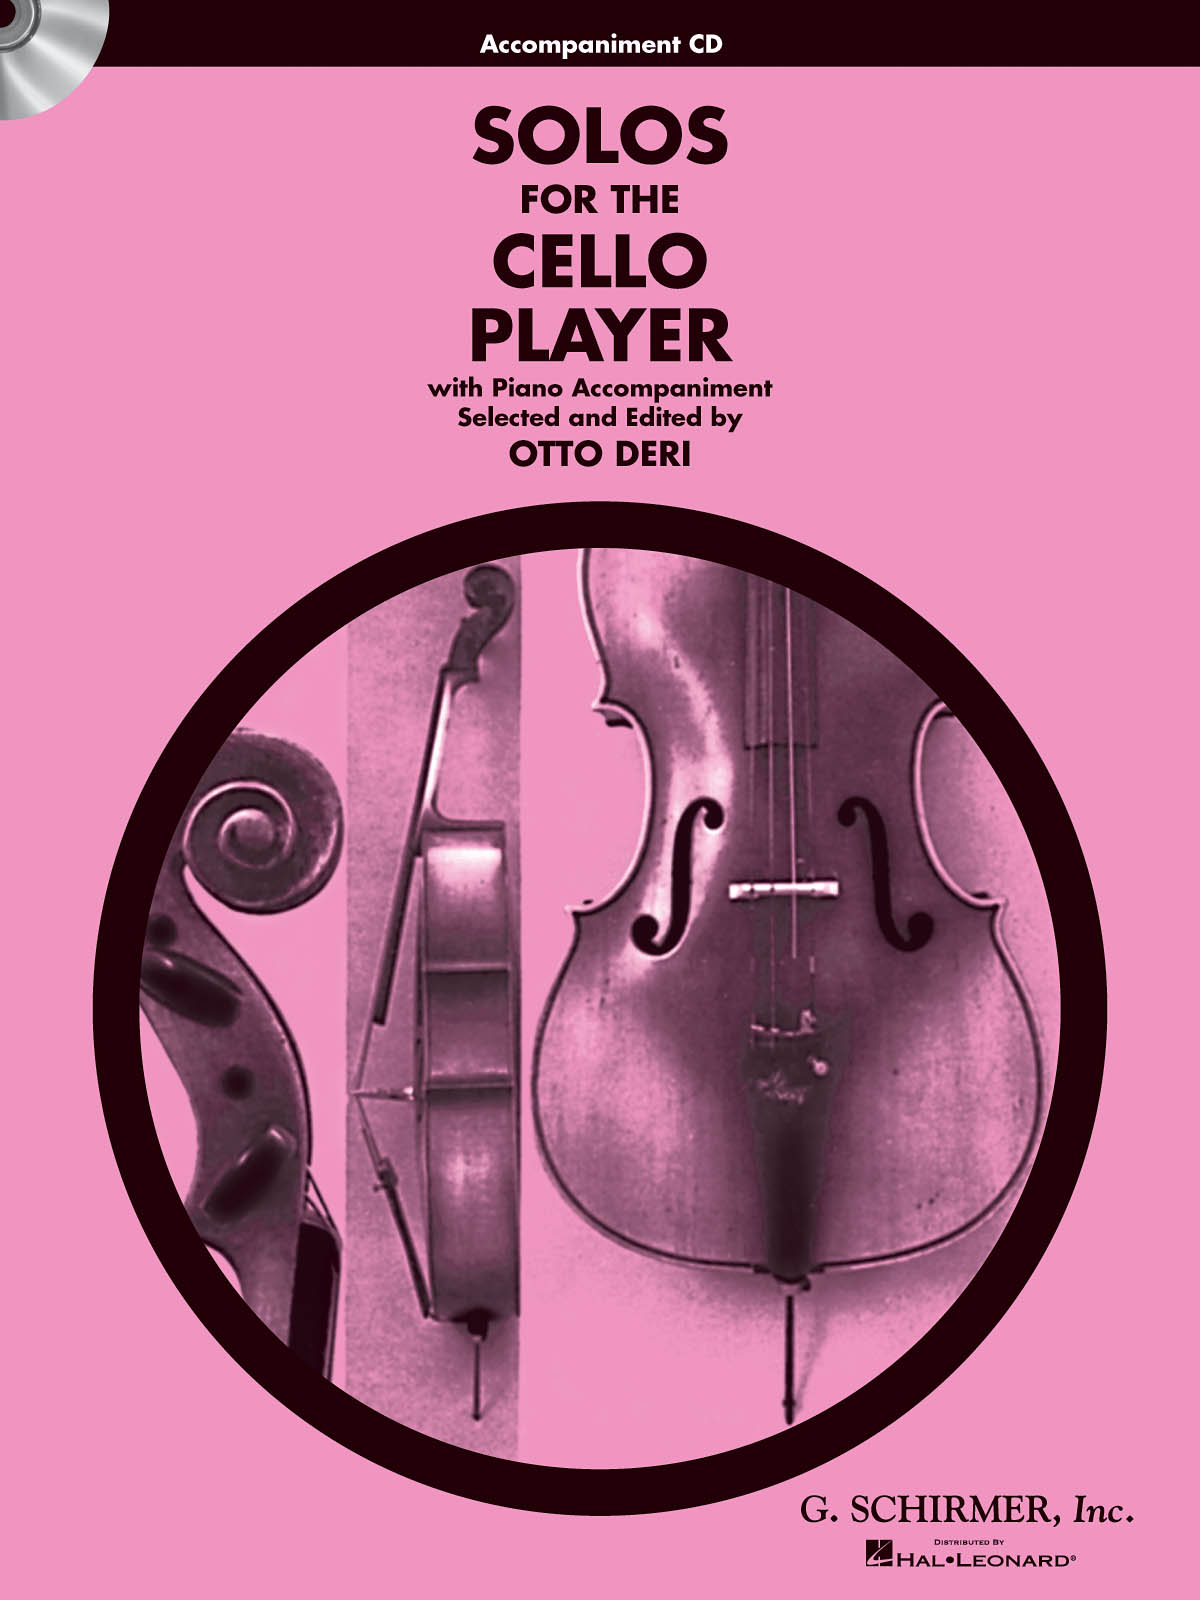 Solos for the Cello Player: Cello and Accomp.: CD